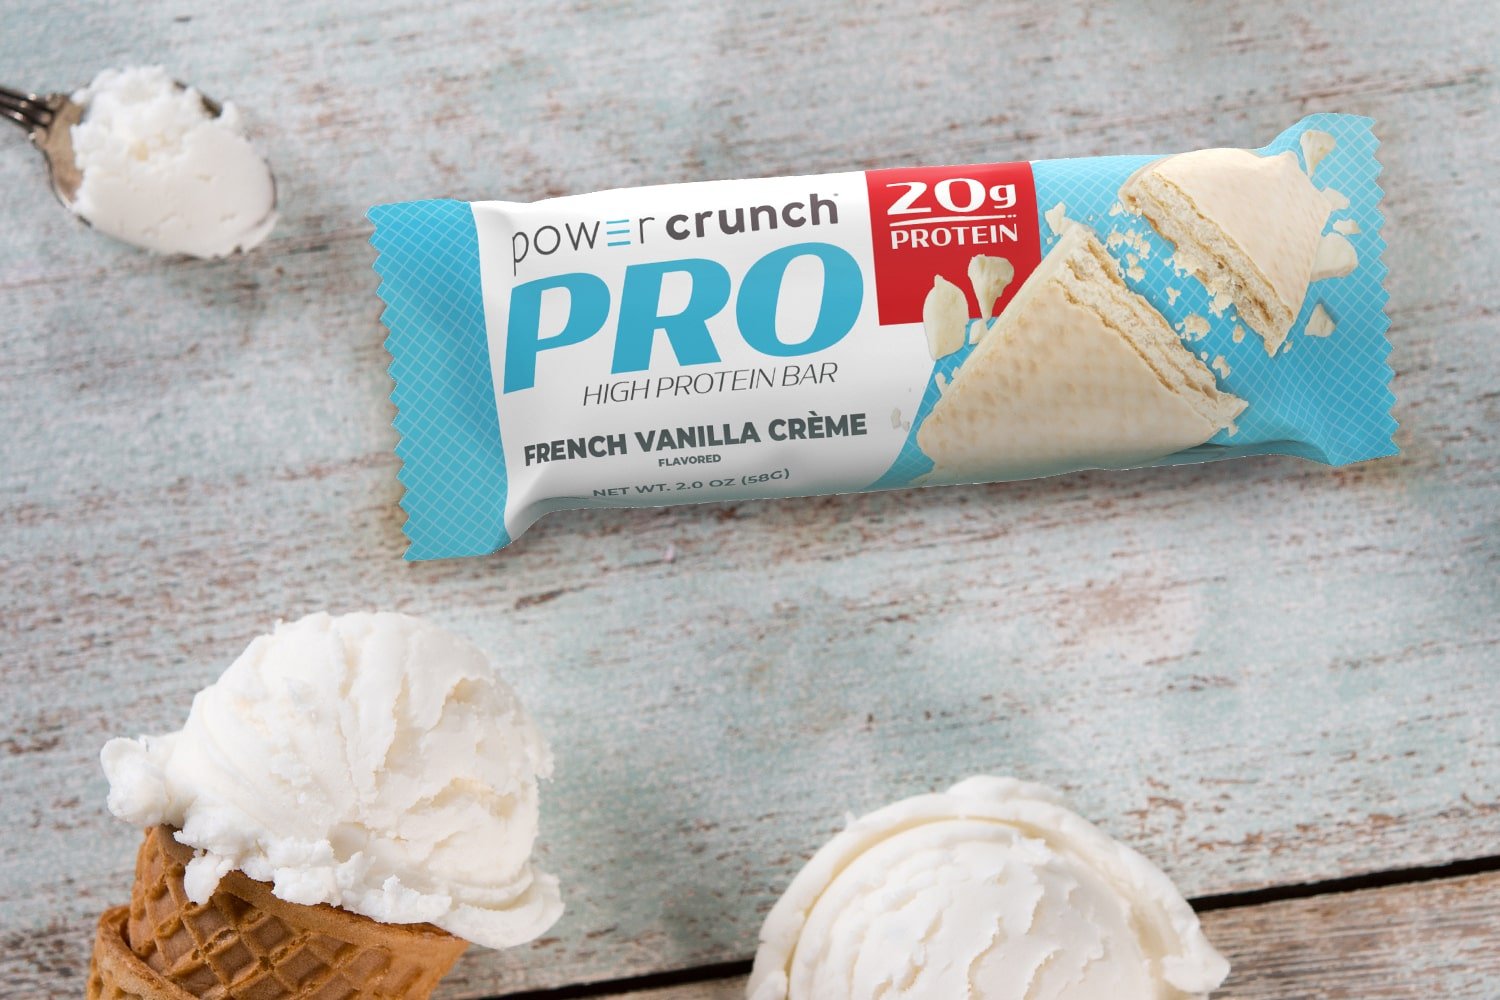 French Vanilla high protein bars as an on-the-go snack